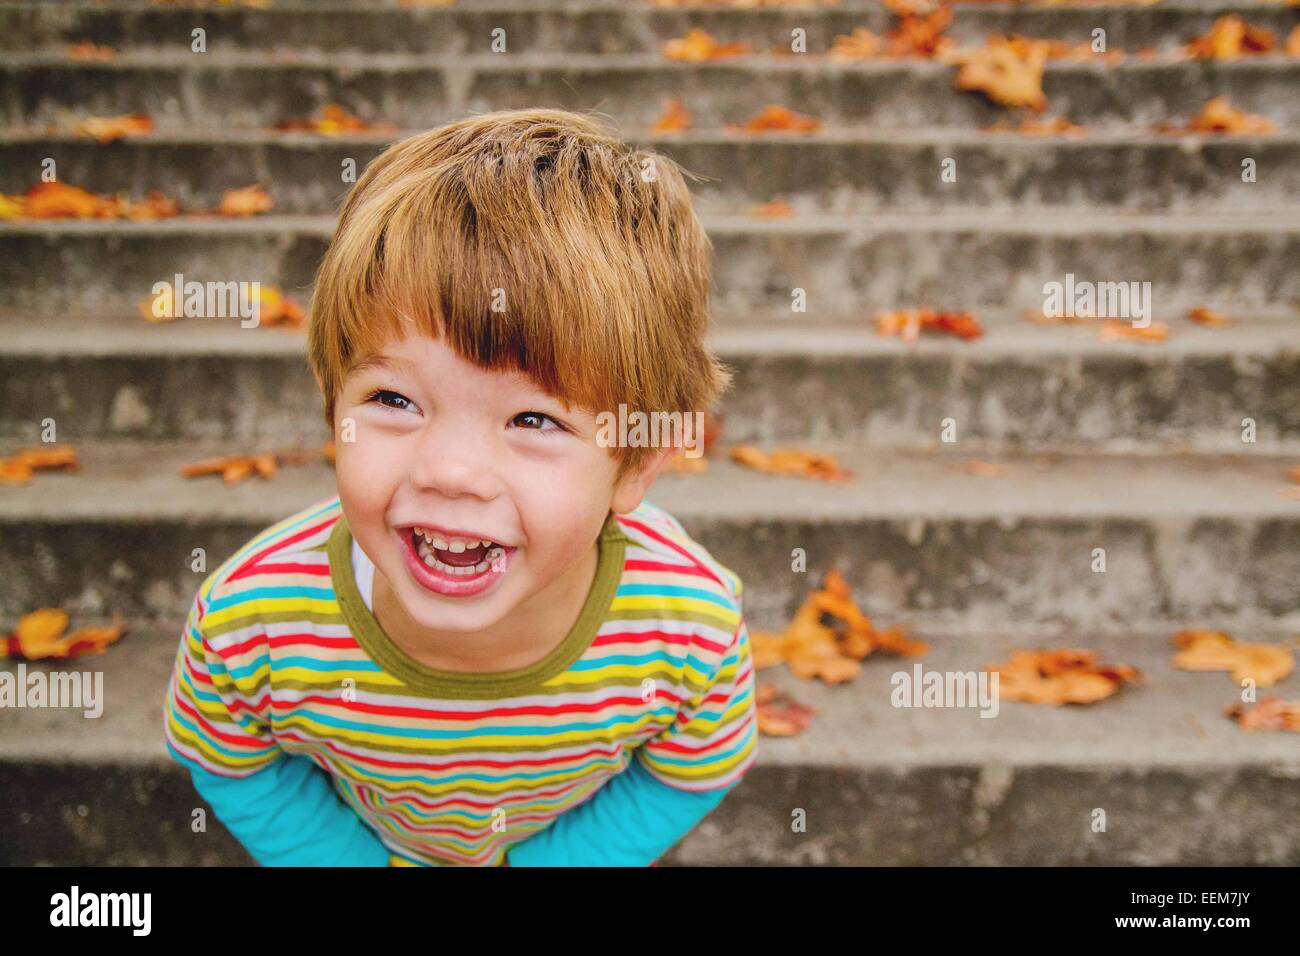 Portrait of a happy boy standing on steps laughing, USA Stock Photo